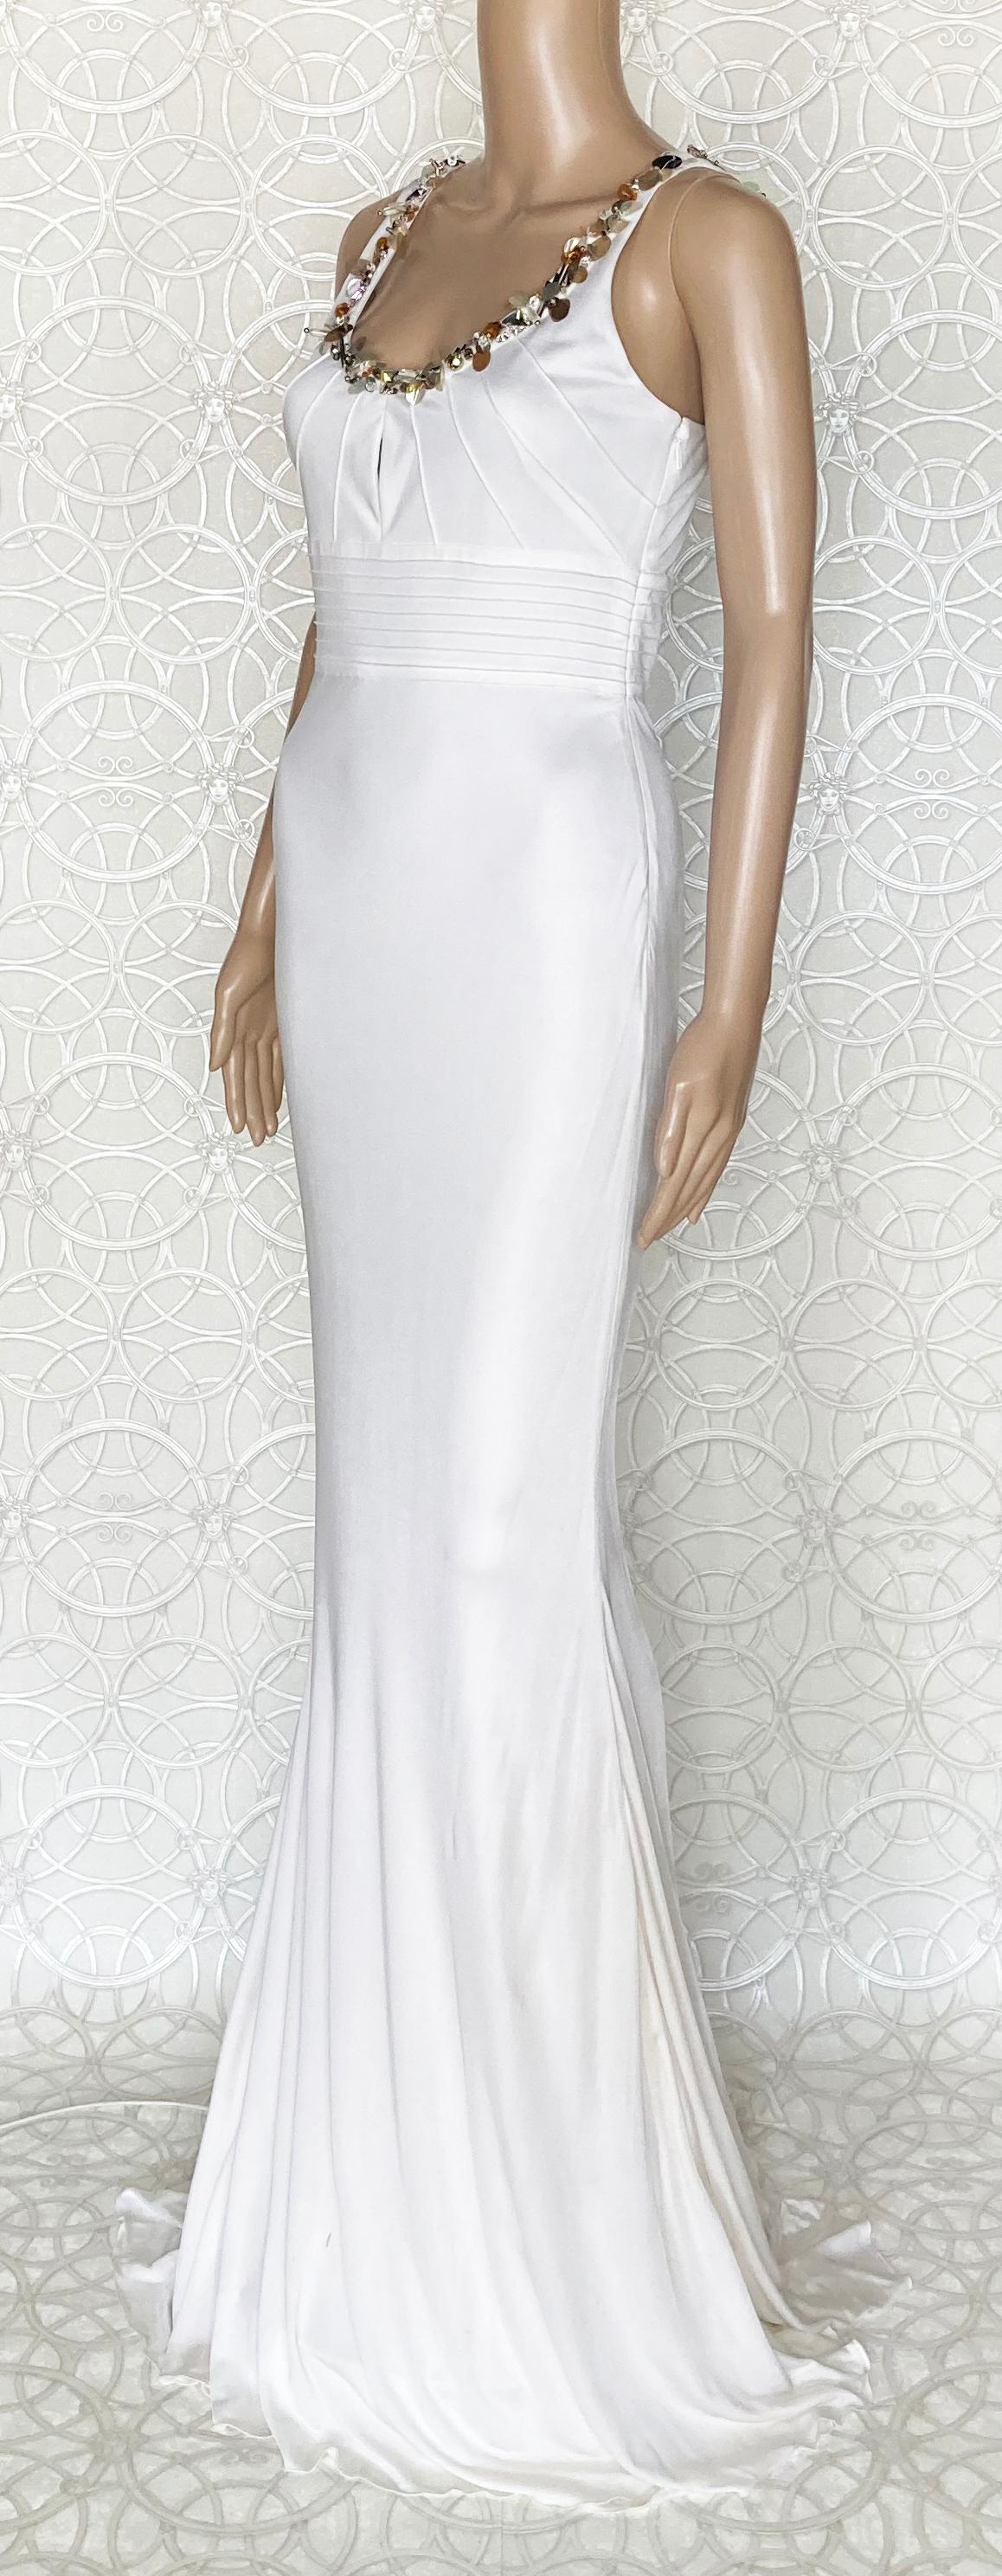 NEW VERSACE CRYSTAL EMBELLISHED WHITE LONG DRESS Gown  42 - 6 For Sale 2